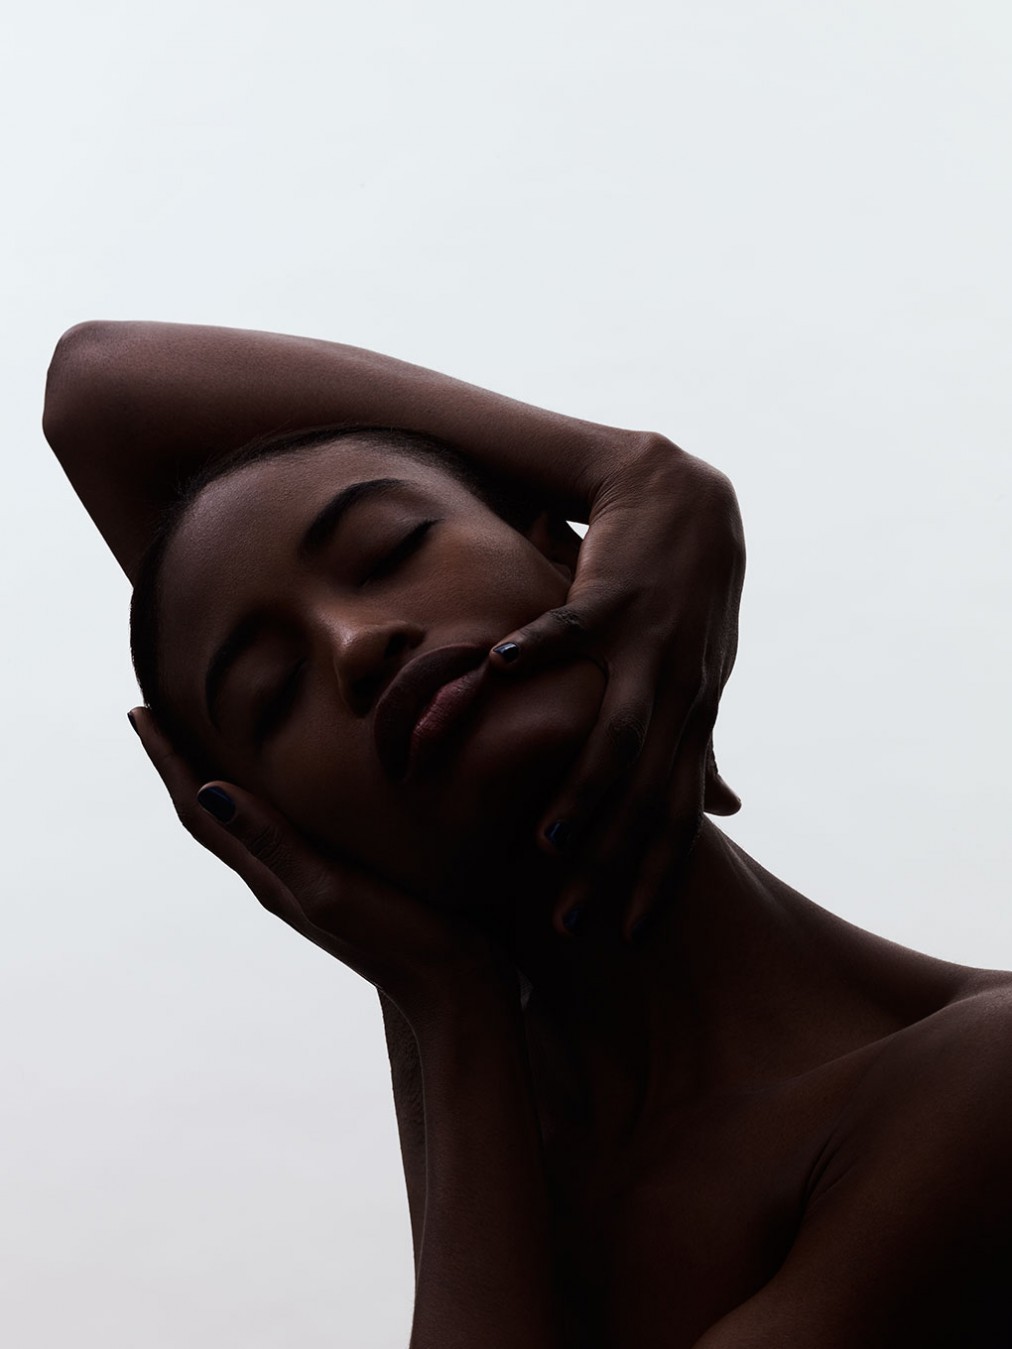 thebeautymodel:  Alicia Burke by Felicity Ingram for Models.com Stylist: Beth Buxton